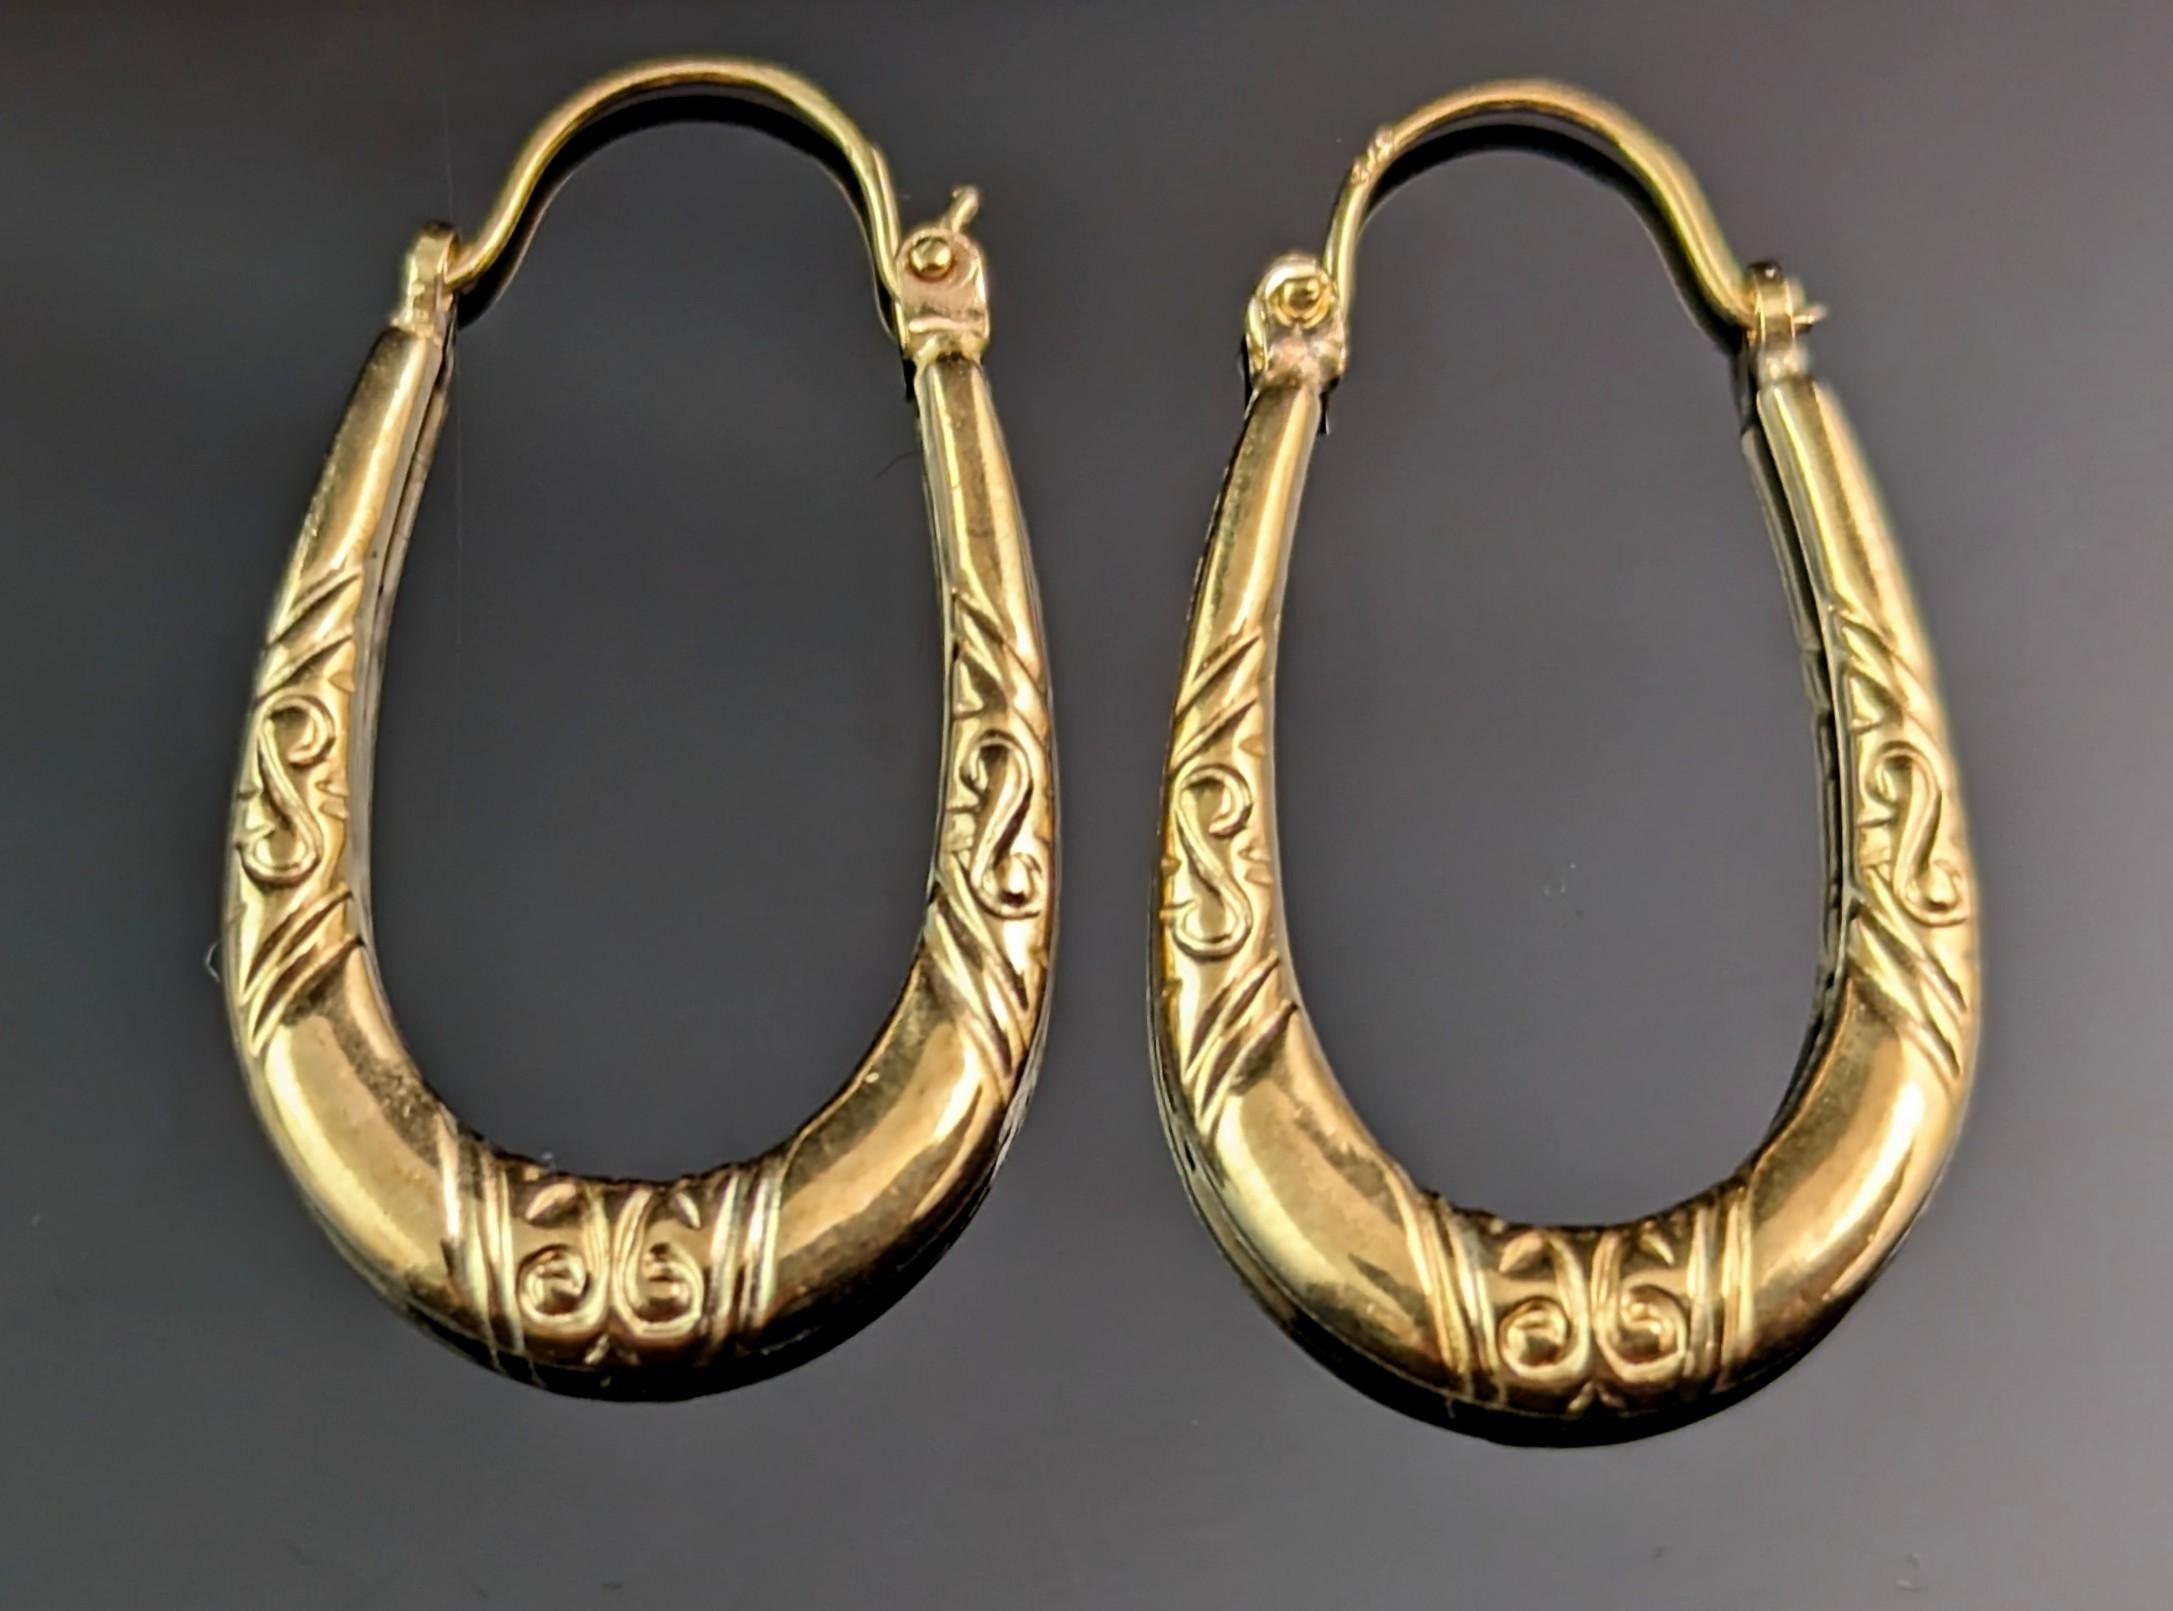 A gorgeous pair of vintage gold creole style hoop earrings. 

Medium sized lightweight hoops with an engraved design. 

They are hollow so nice and lightweight making them easy to wear. 

They are for pierced ears and have a latch back style